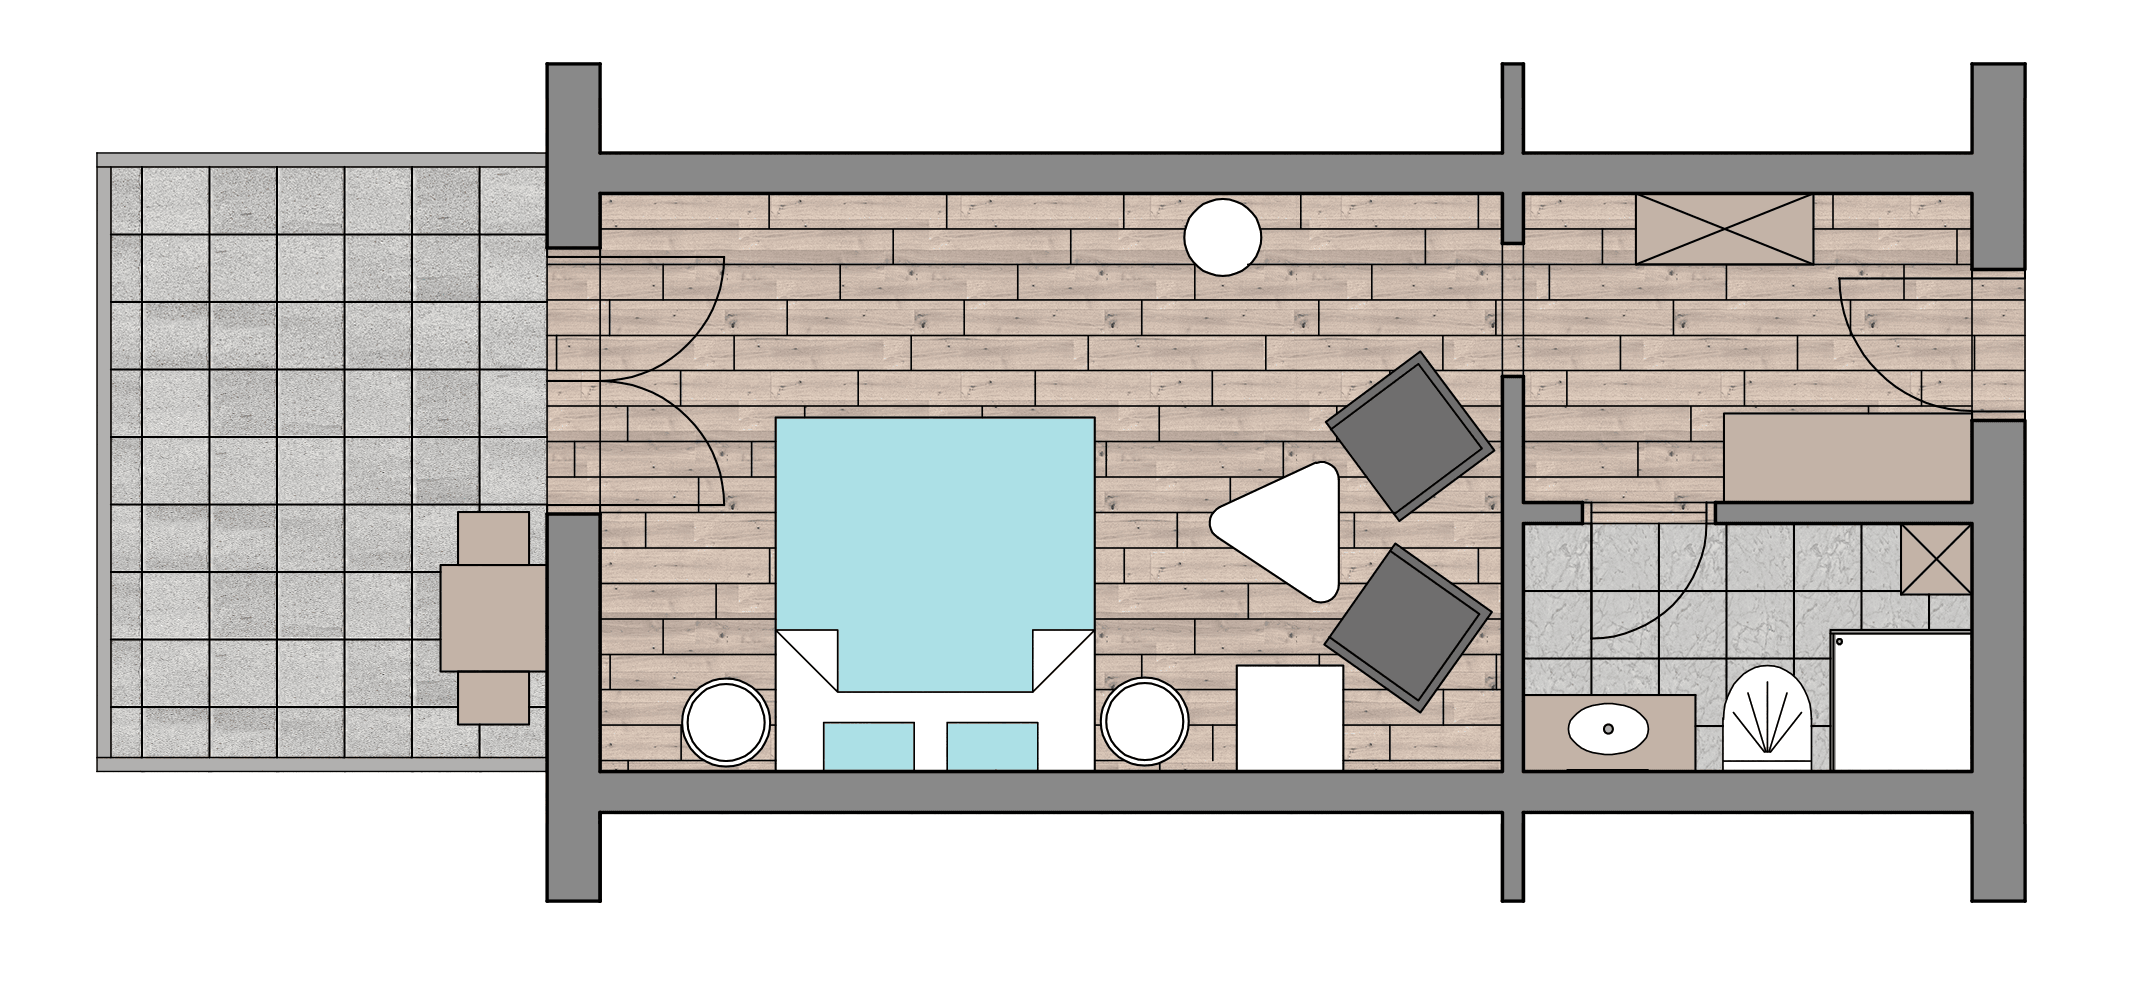 Ground plan of the room